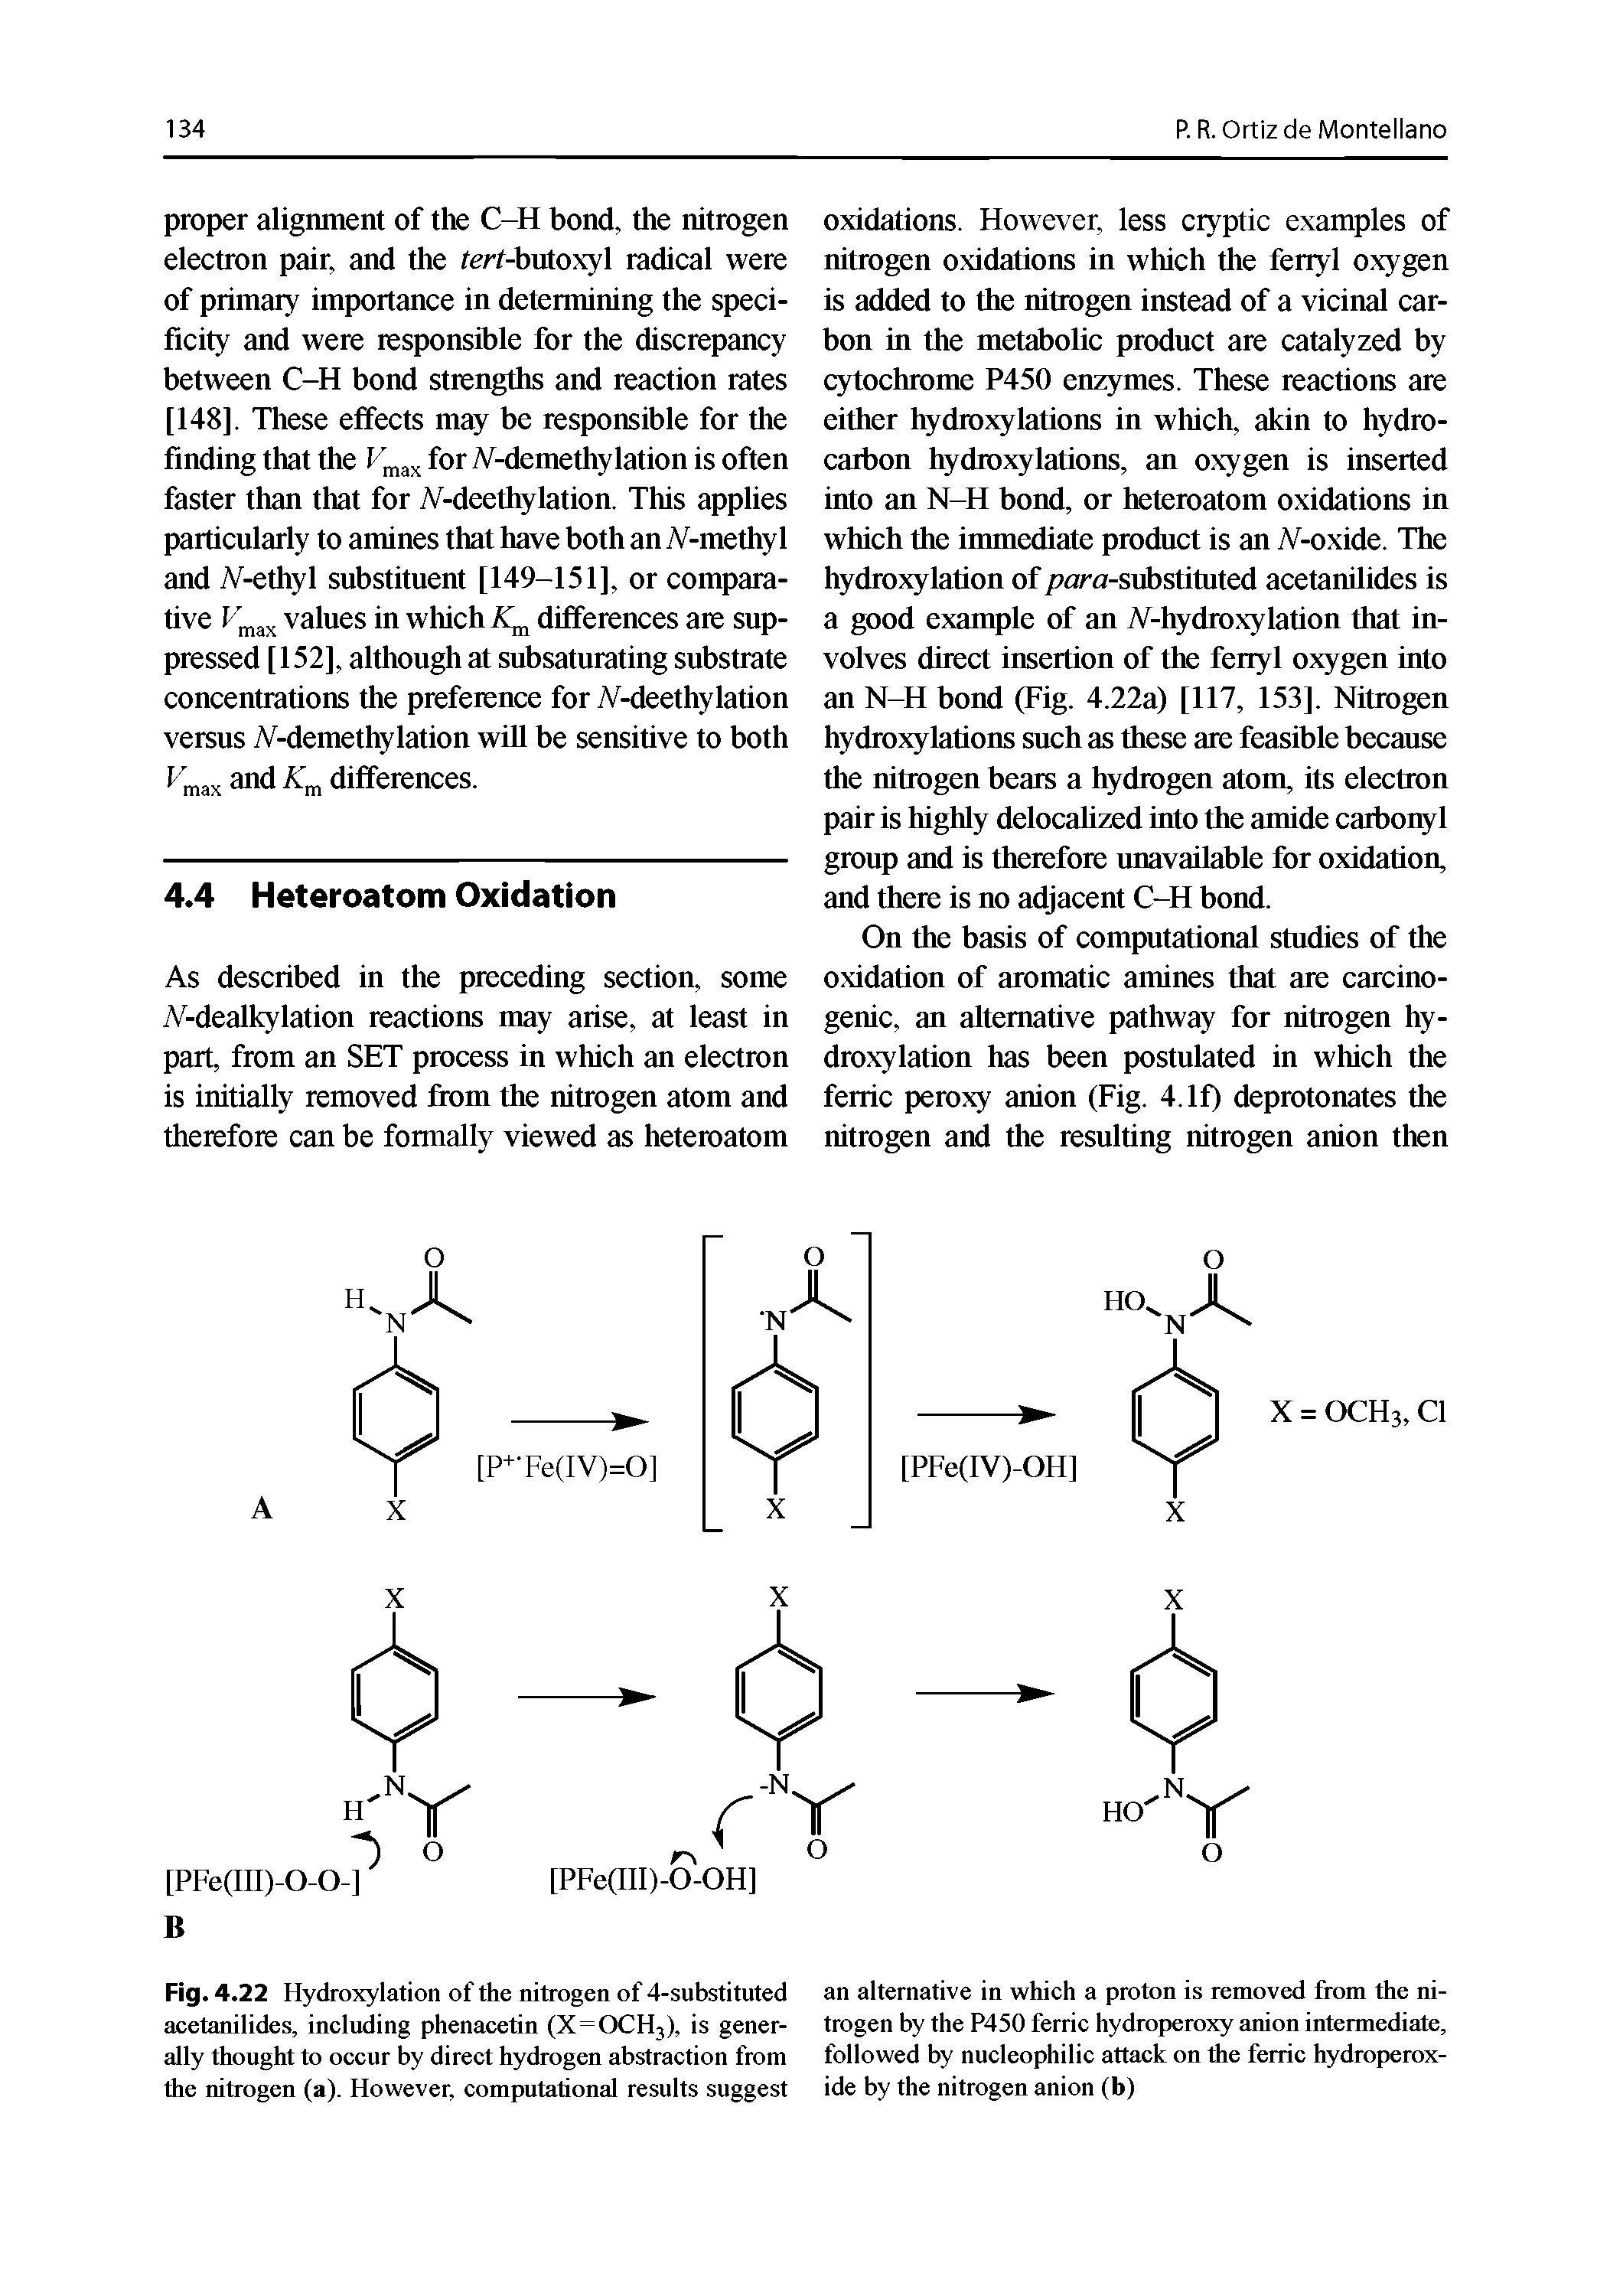 Fig. 4. 22 Hydroxylation of the nitrogen of 4-substituted aeetanilides, ineluding phenaeetin (X=OCH3), is generally thought to occur by direct hydrogen abstraction from the nitrogen (a). However, computational results suggest...